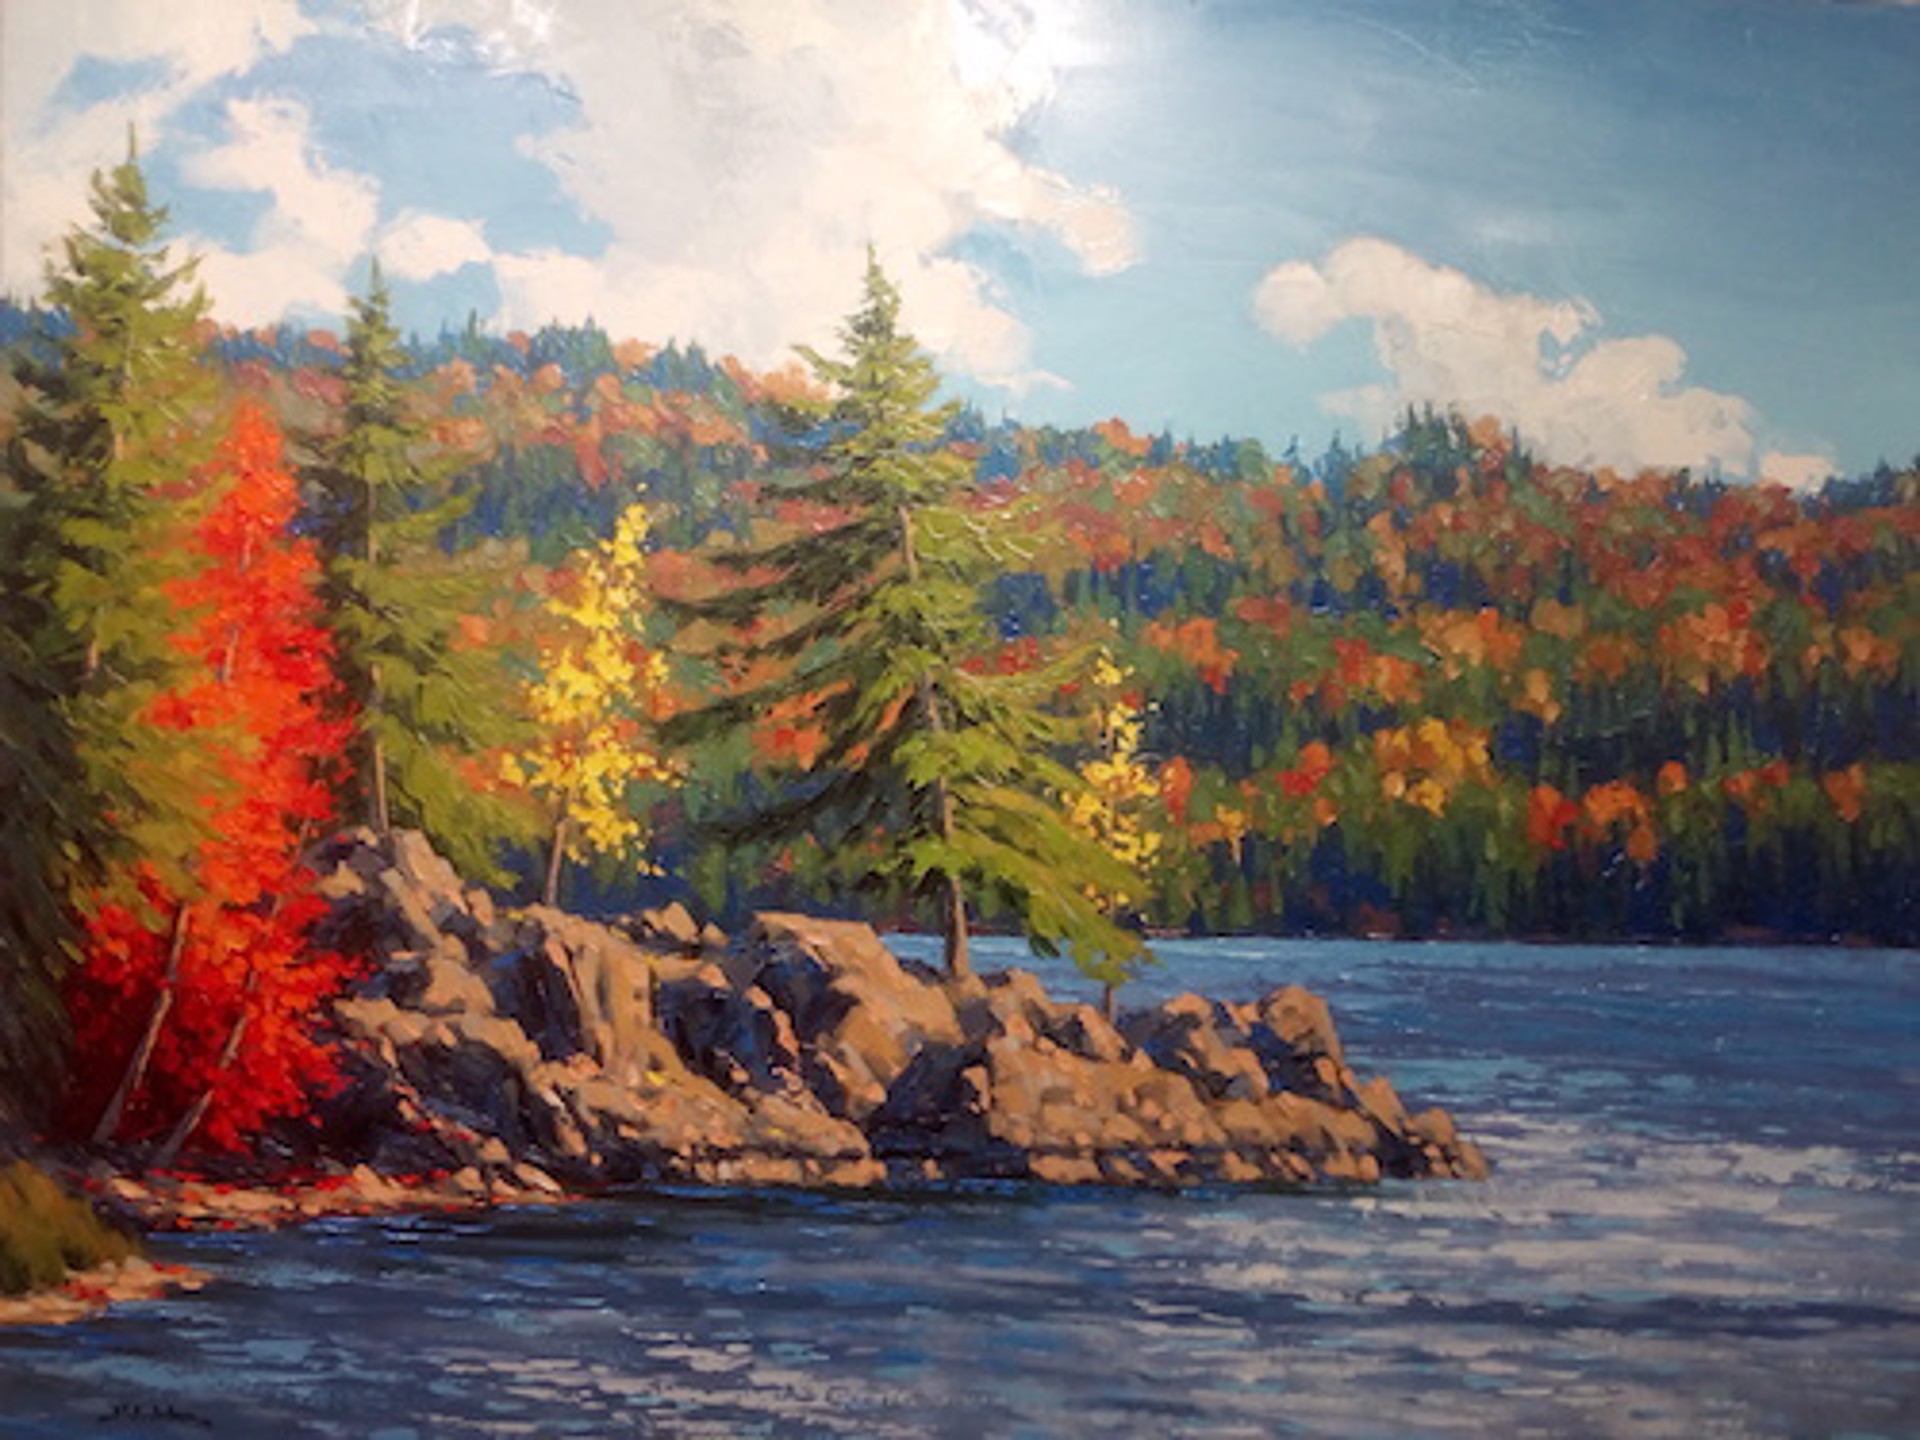 Lake of Two Rivers (Algonquin) by Robert E Wood